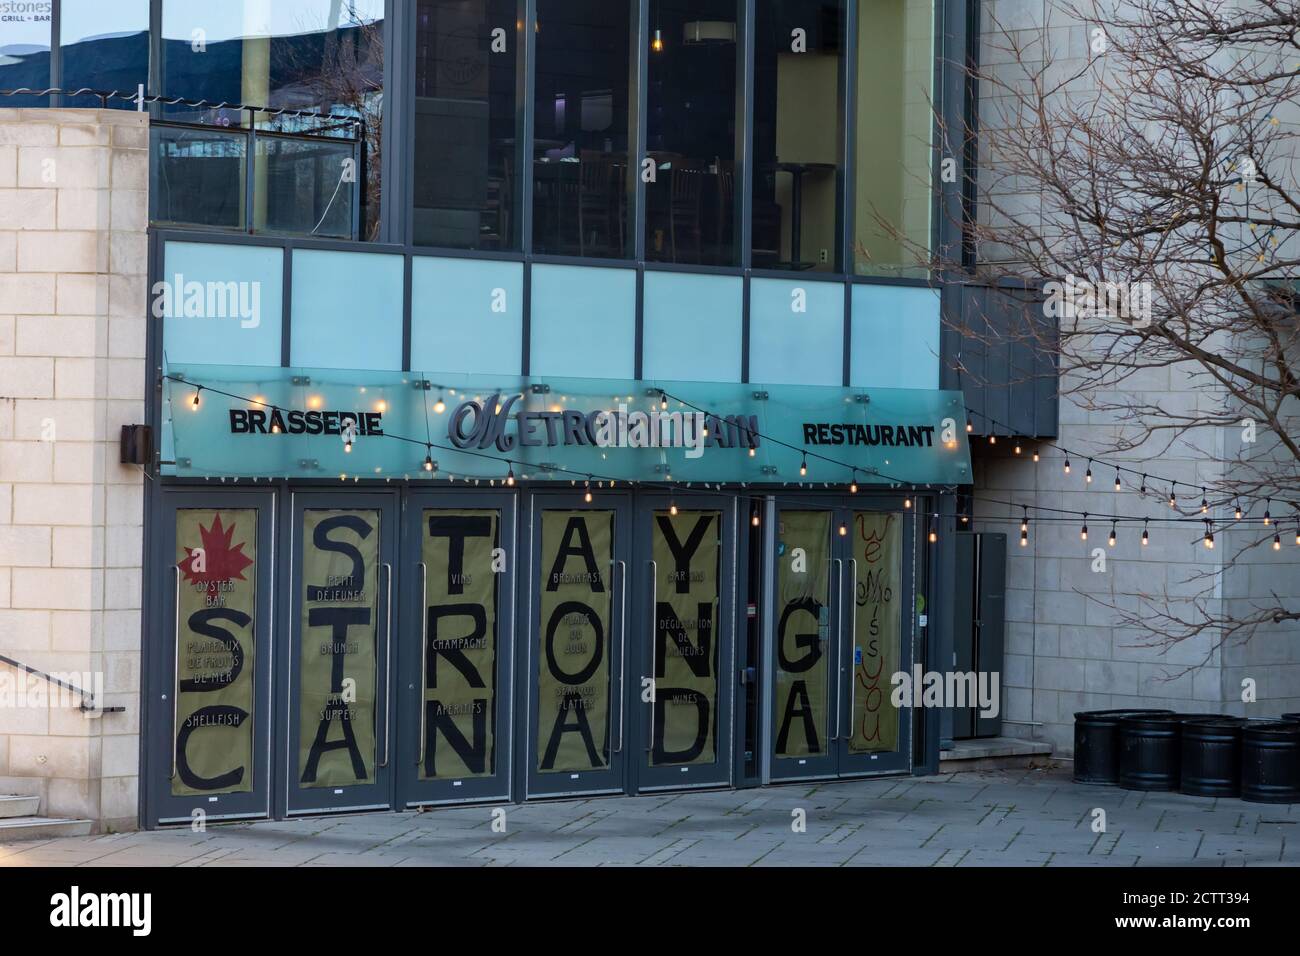 In May 2020, a message in the doors of the Metropolitan restaurant in downtown Ottawa during the COVID-19 pandemic says 'Stay Strong Canada'. Stock Photo